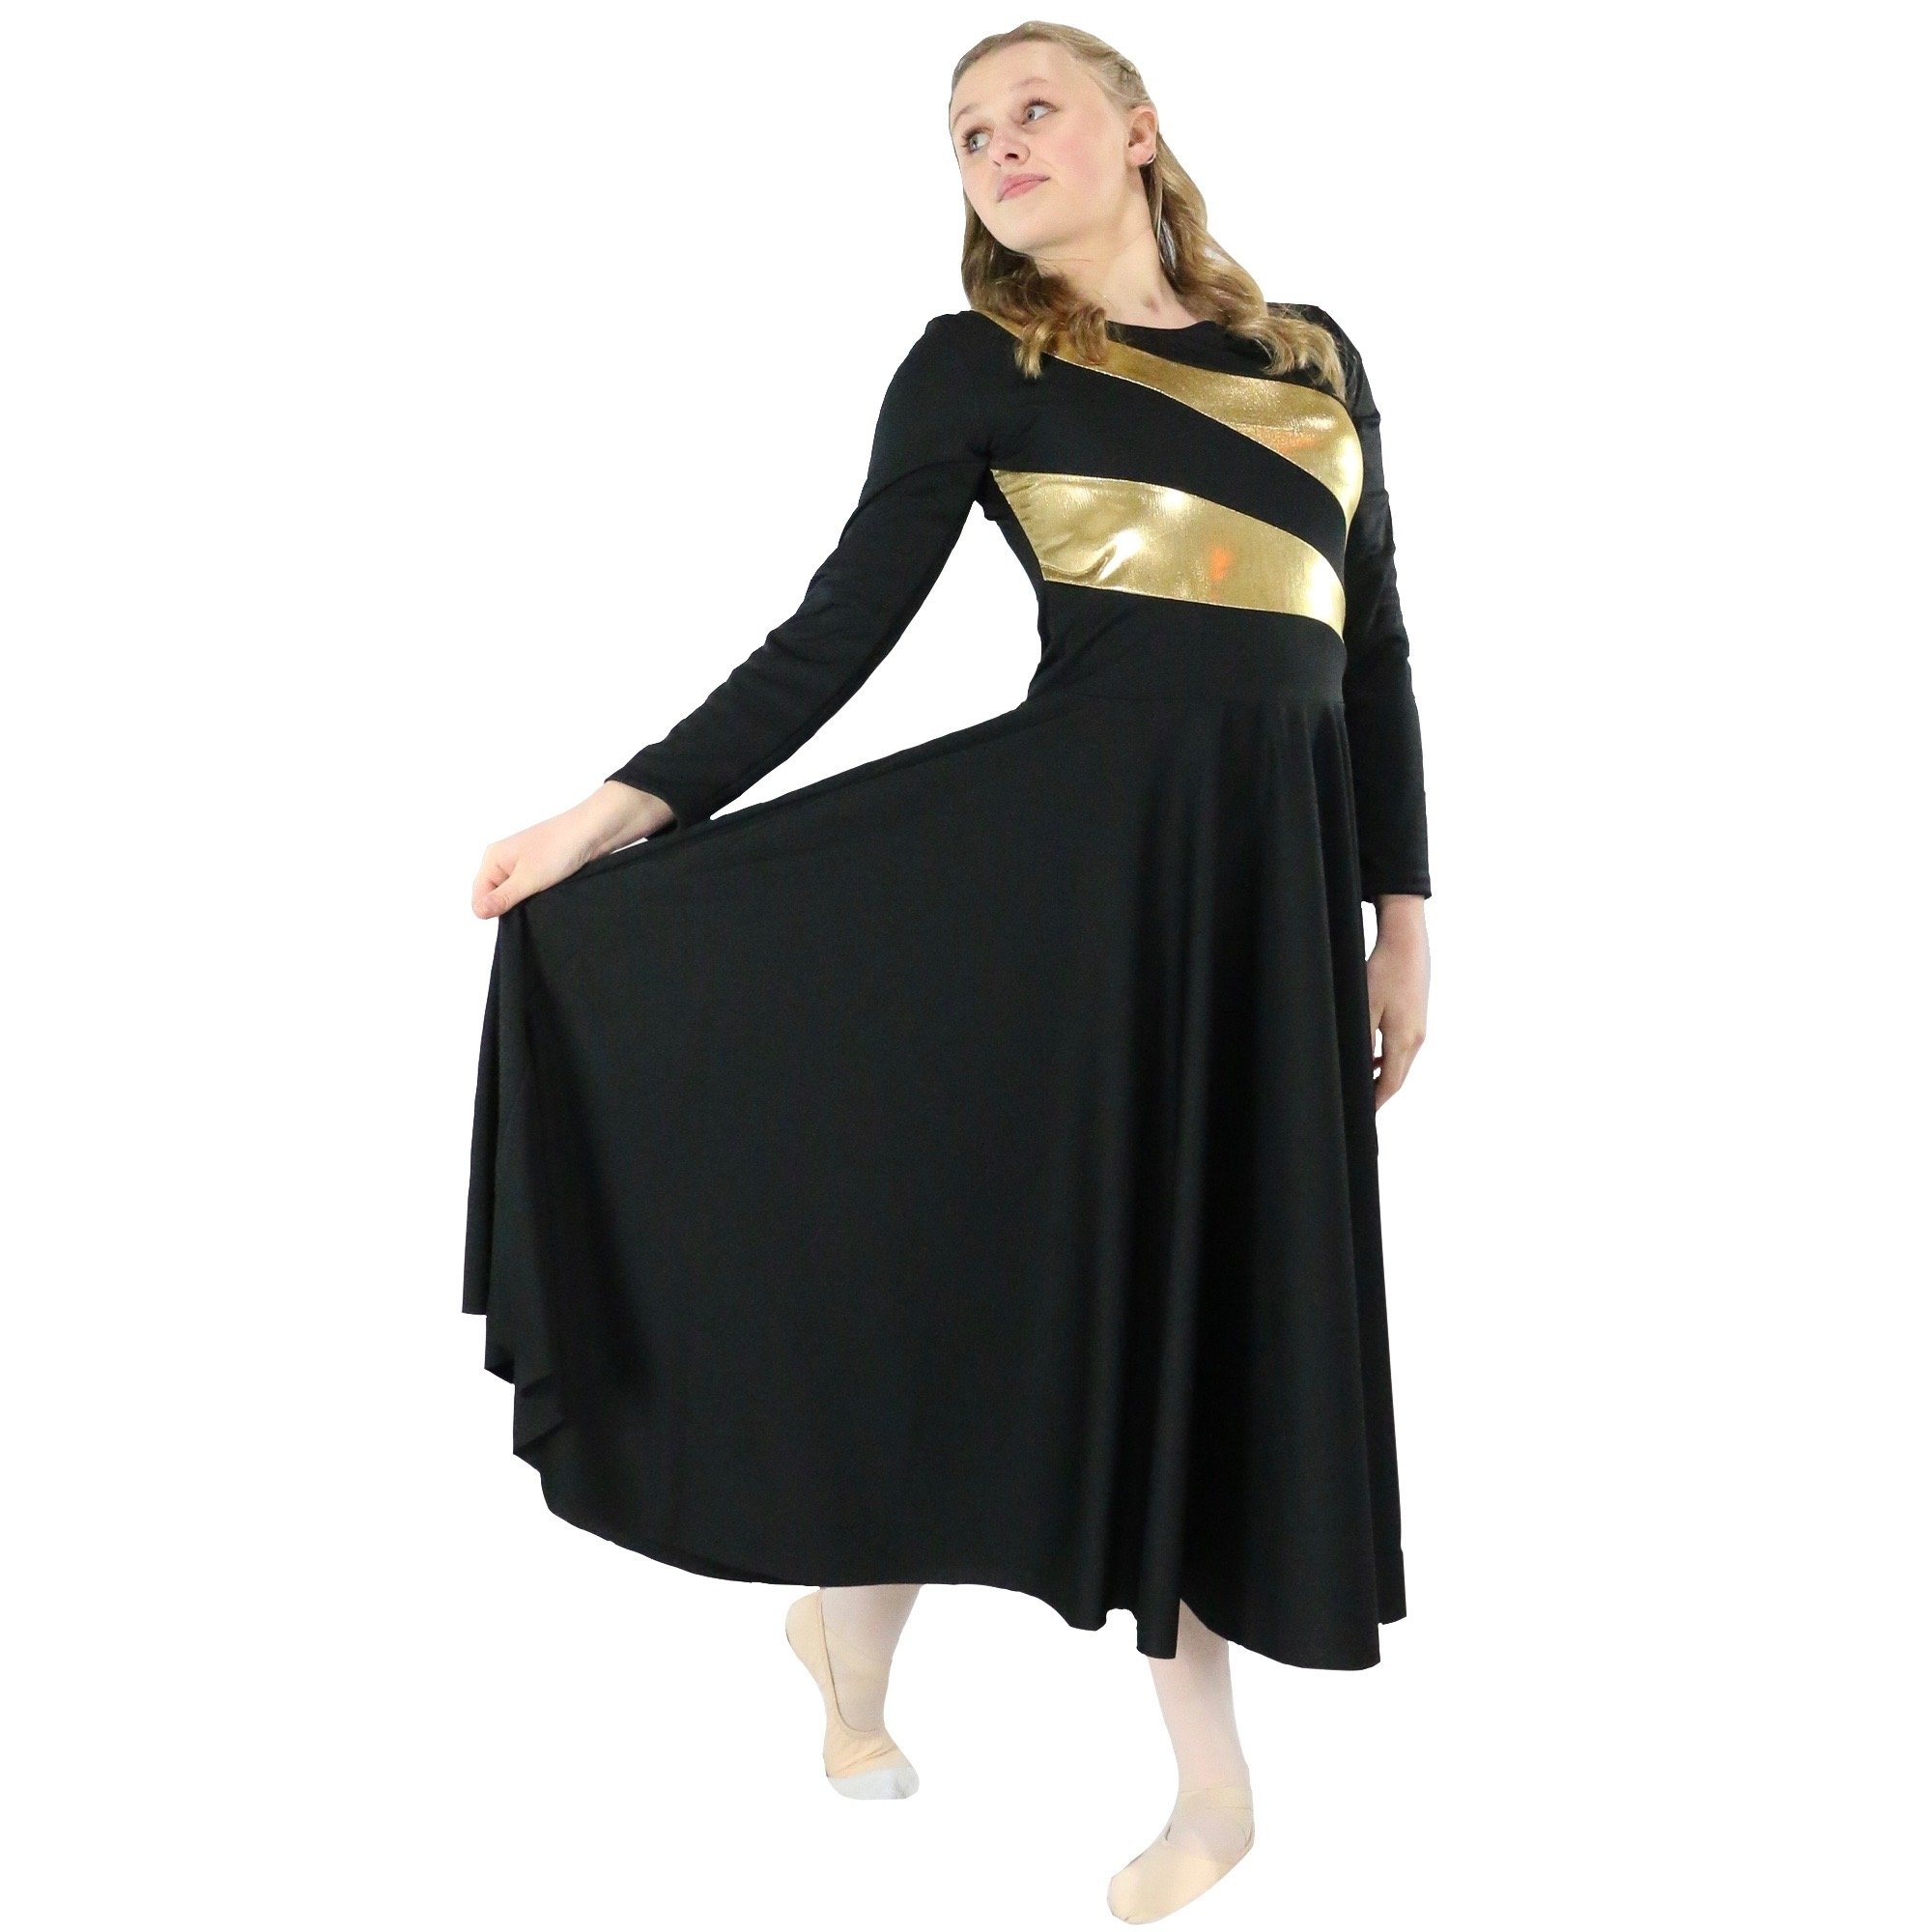 Danzcue Child Praise Dance Shimmery Parallel Long Sleeve Dress - Click Image to Close